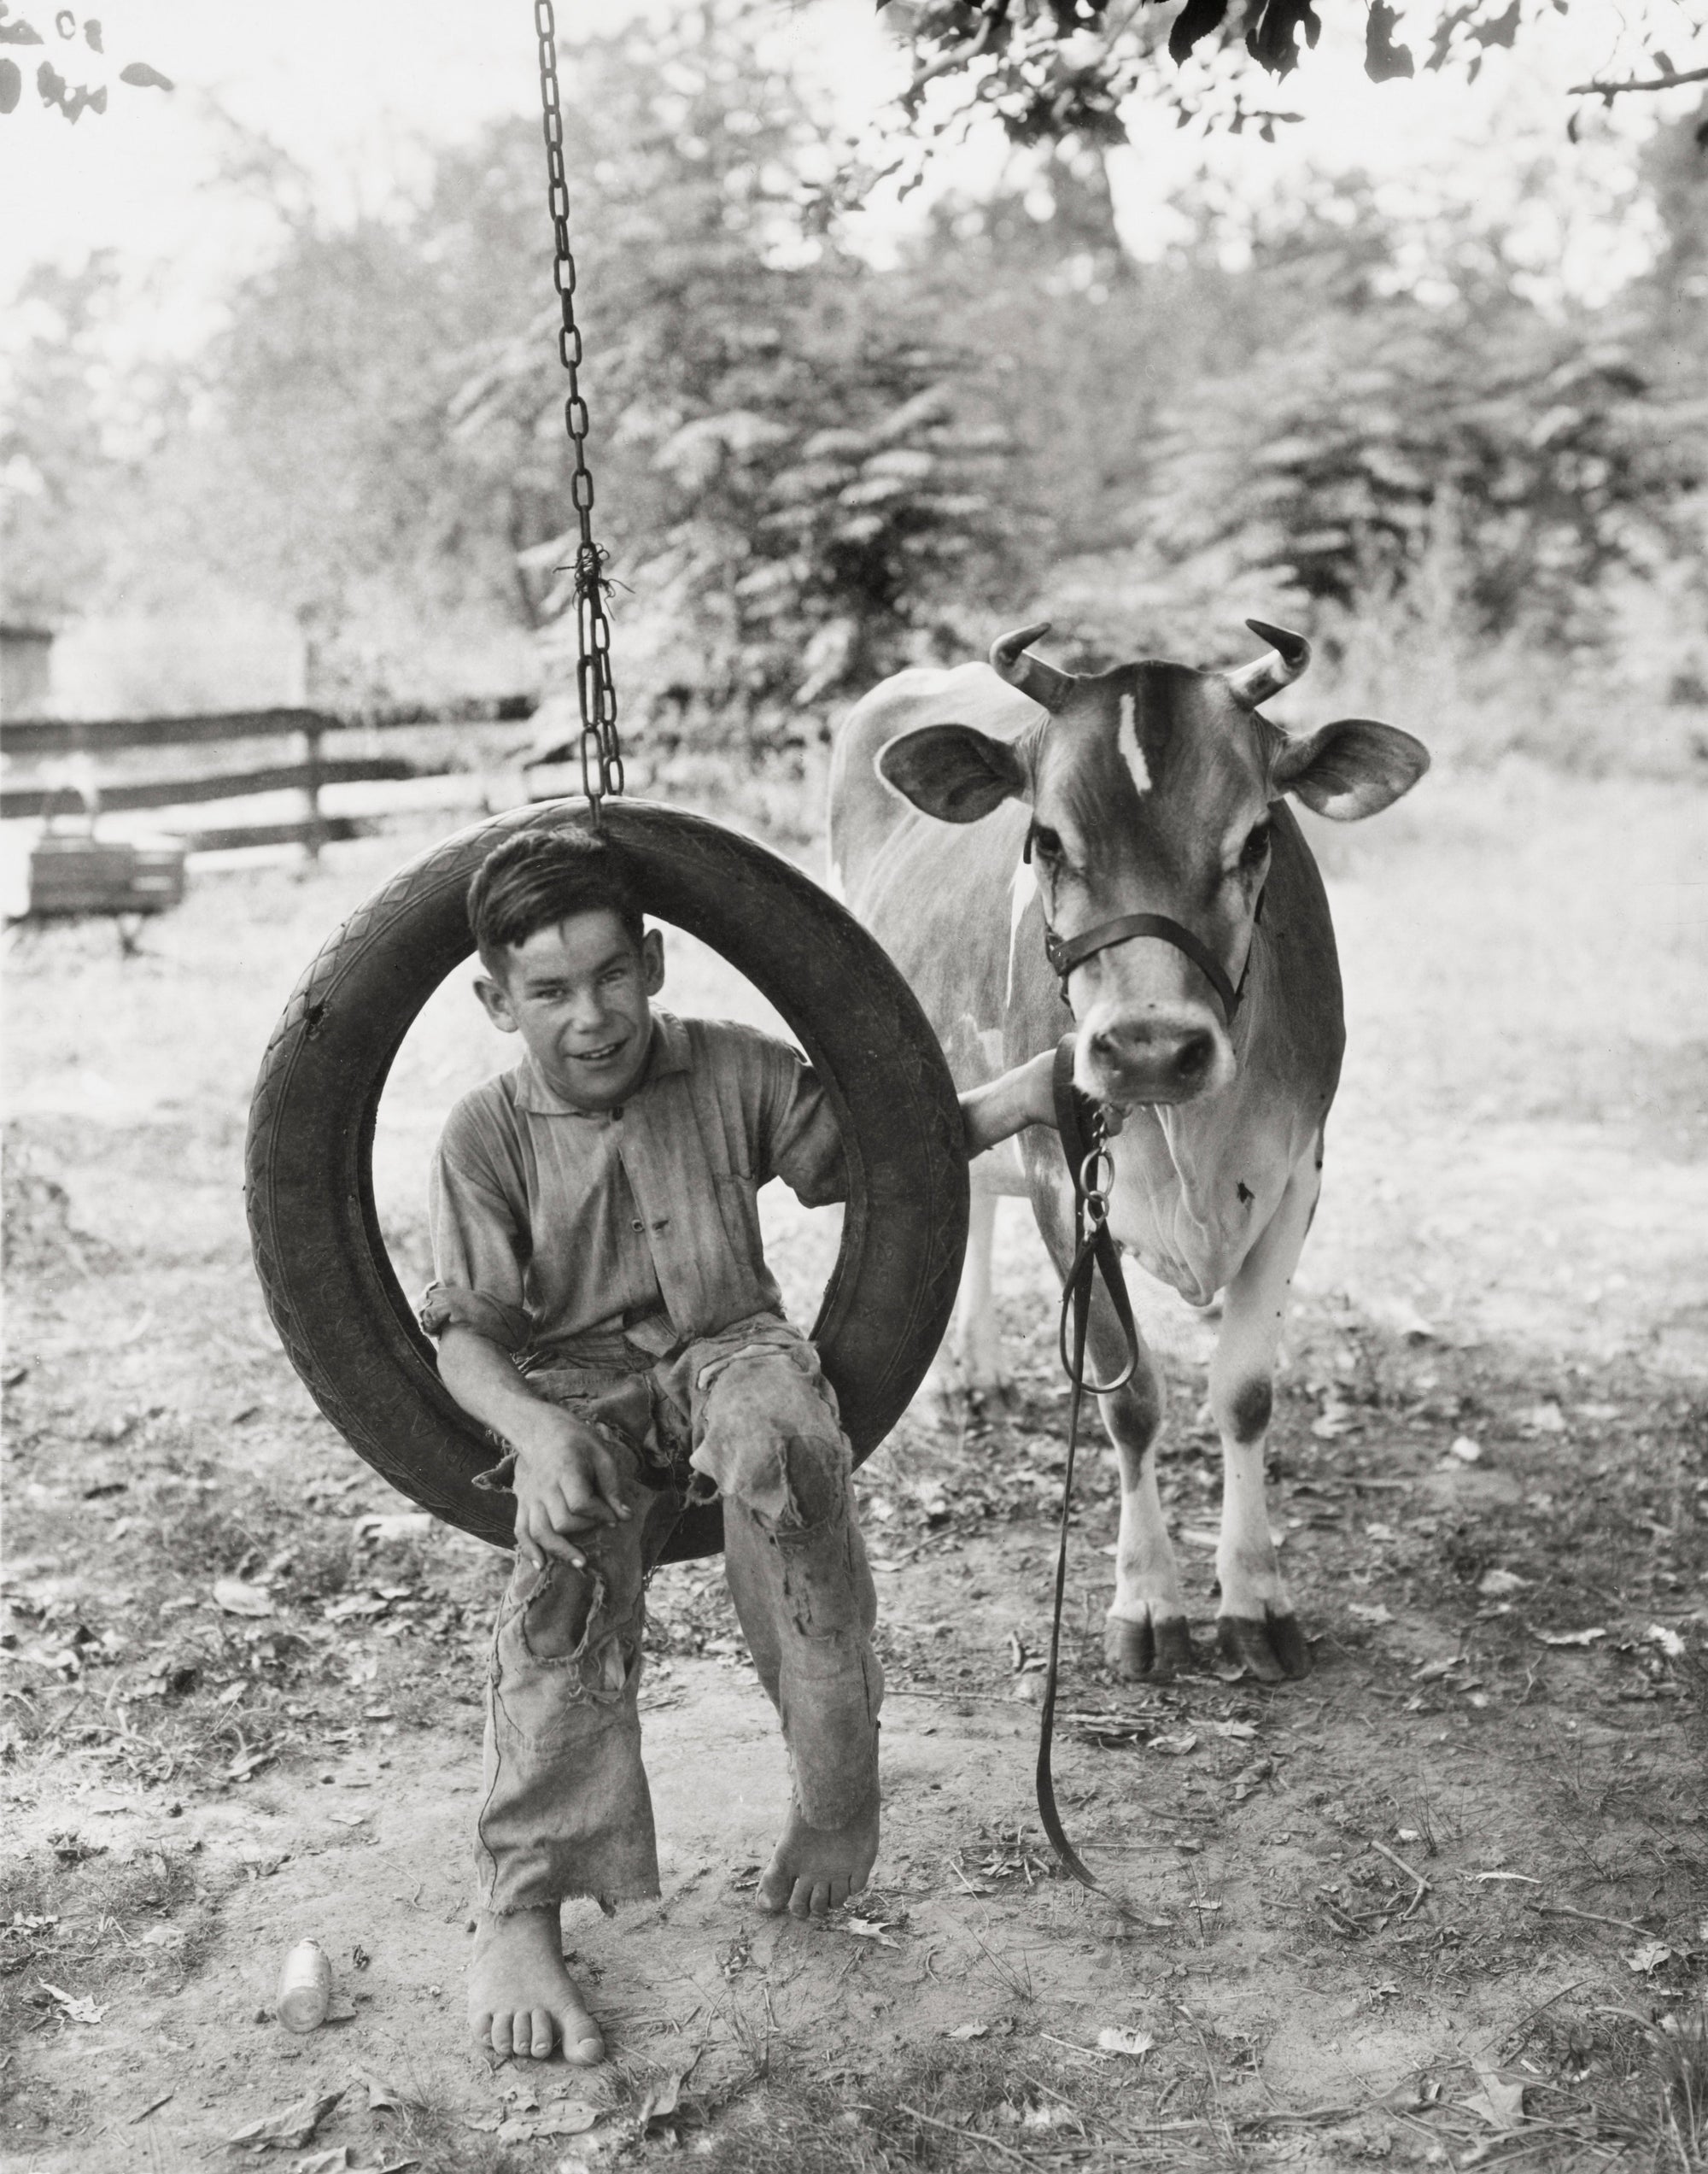 A Boy on a Tire Swing and Cow-Farm Photo, 1930 Historical Pix